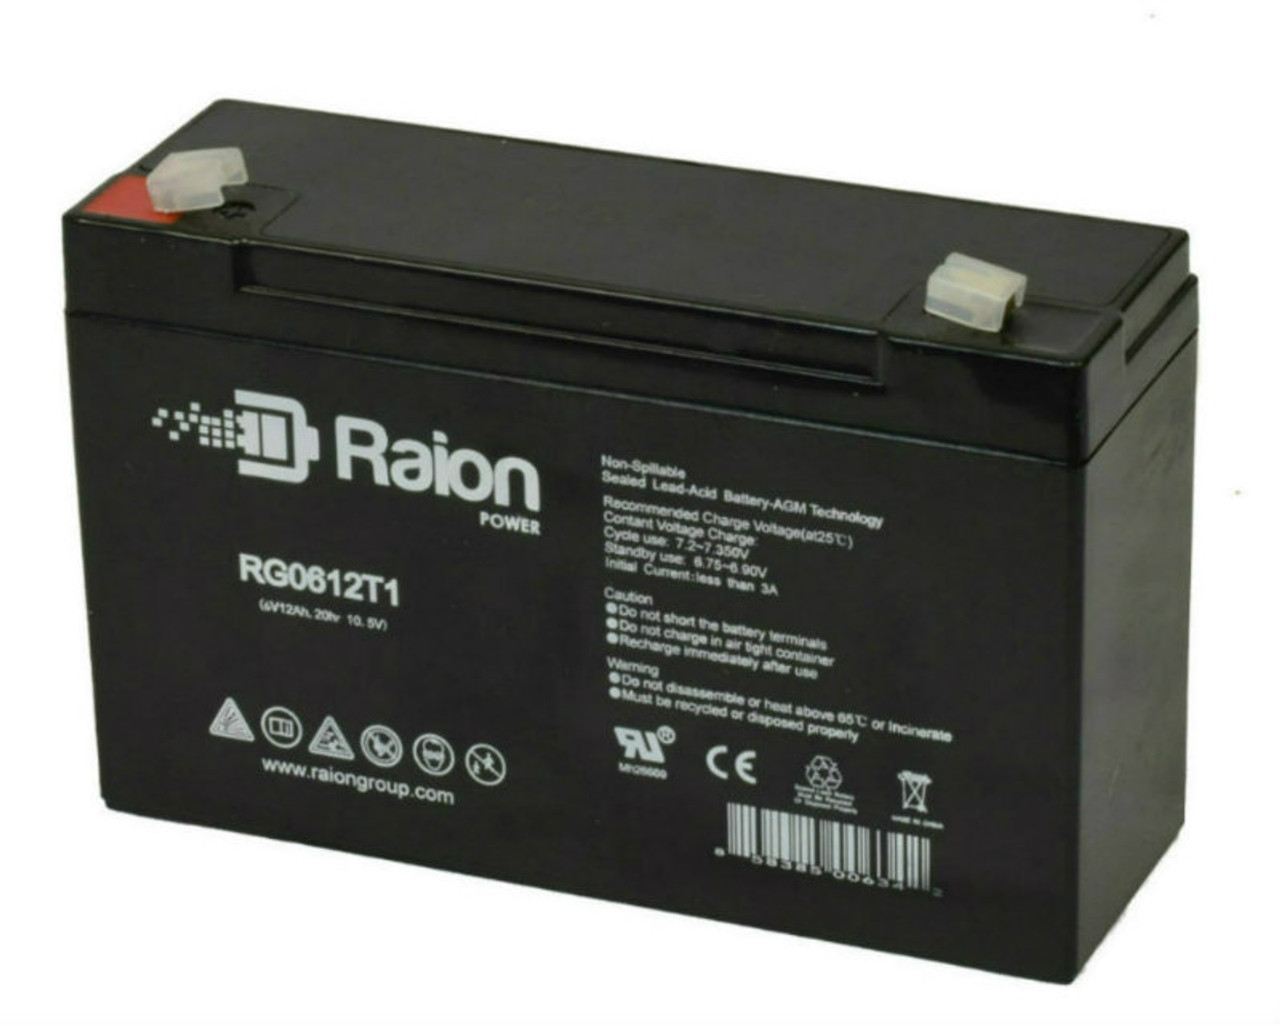 Raion Power RG06120T1 Replacement Battery for Delta DT 612